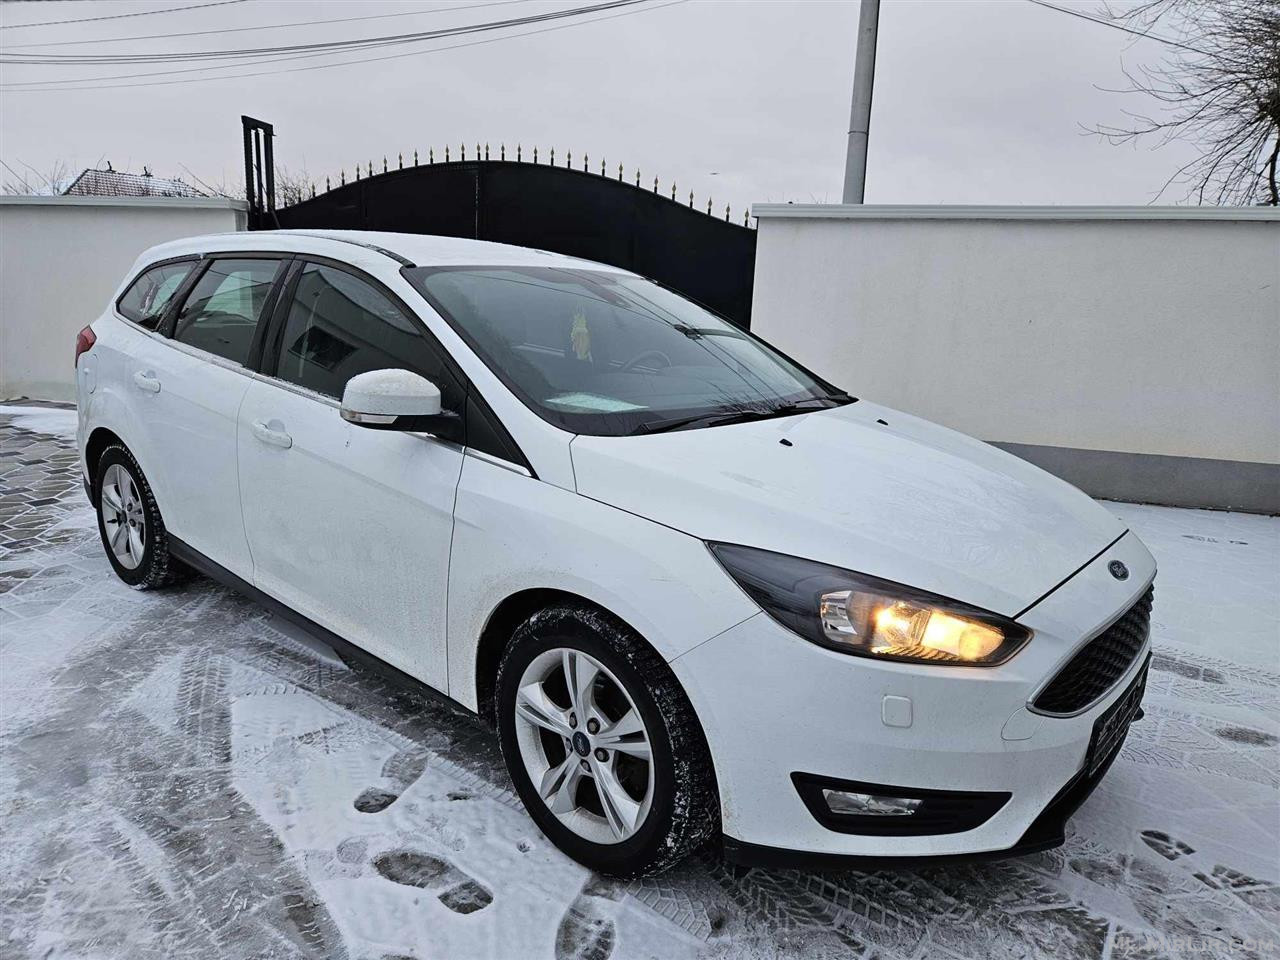 Ford Focus 2015 1.5 TDCI (120ps) EURO 6